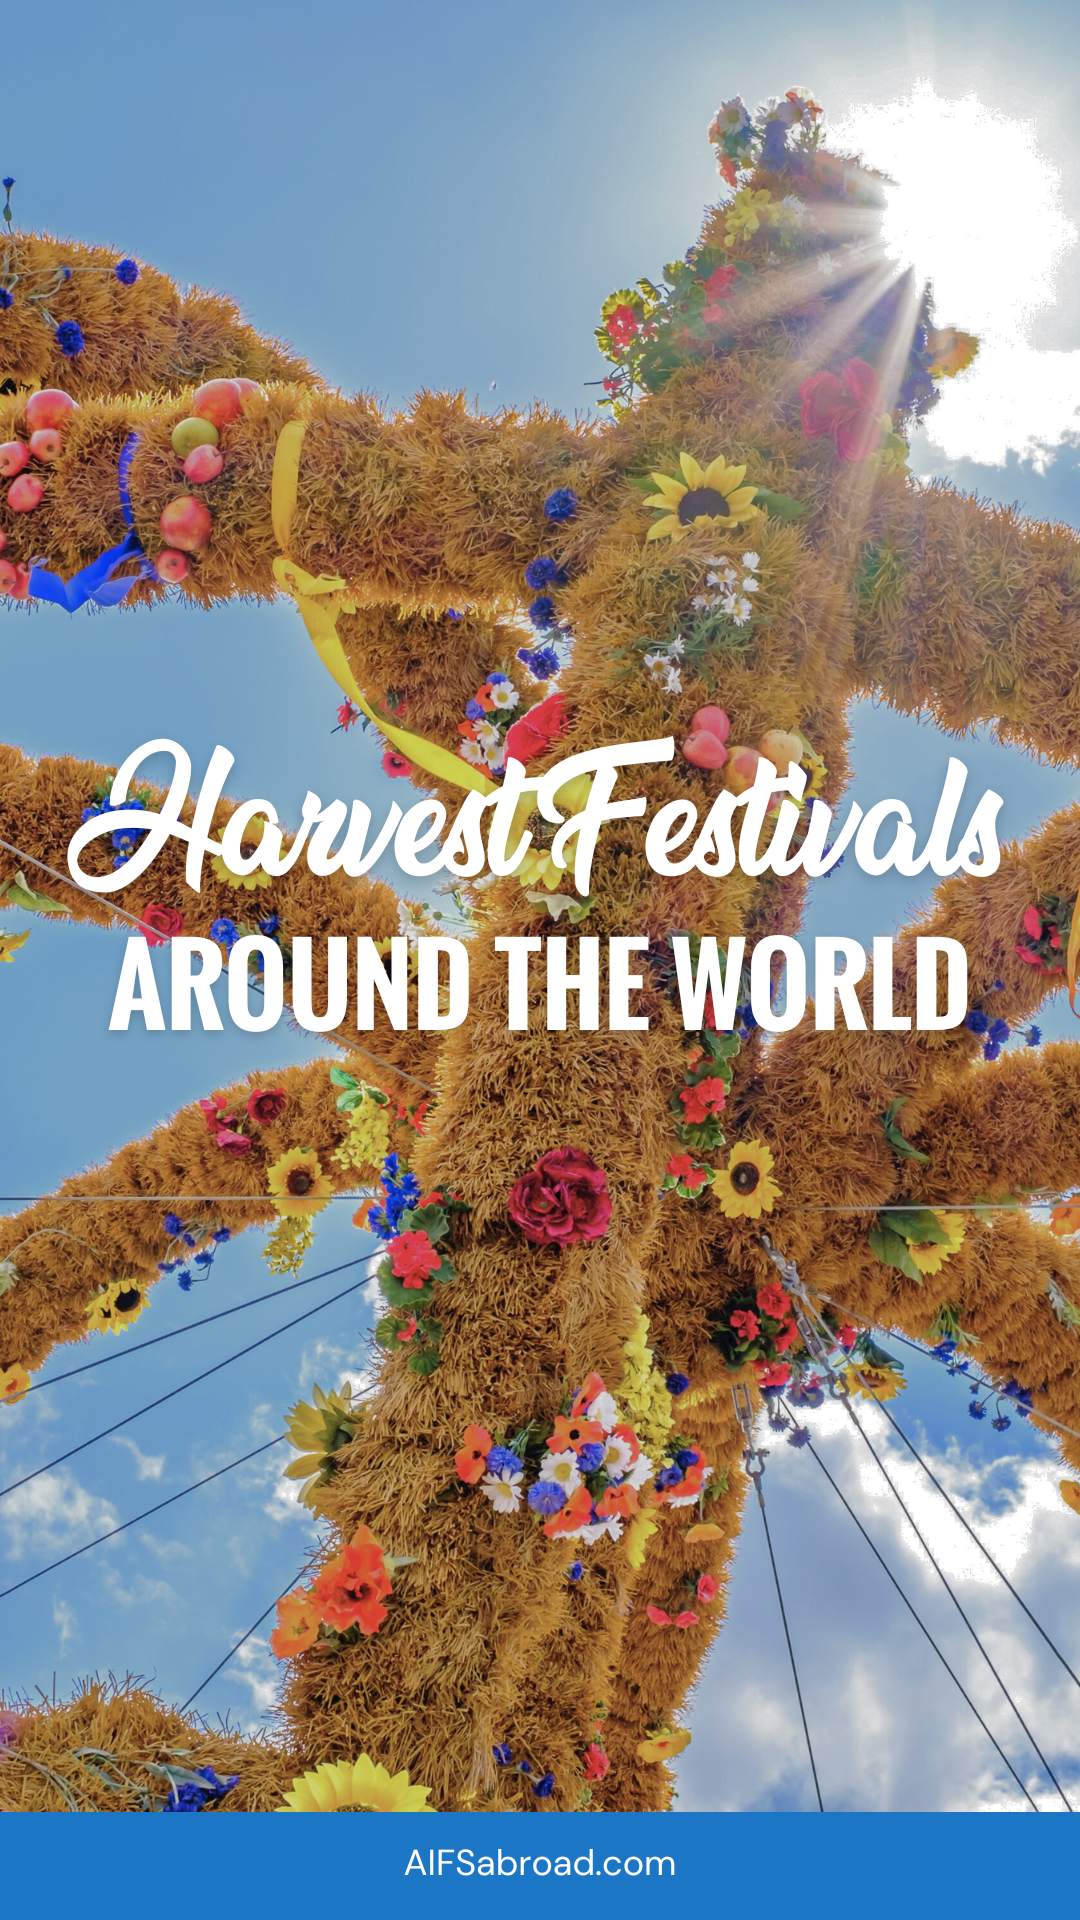 Pin Image - Harvest festival crown decor in Germany with text overlay saying "Harvest Festivals around the World"